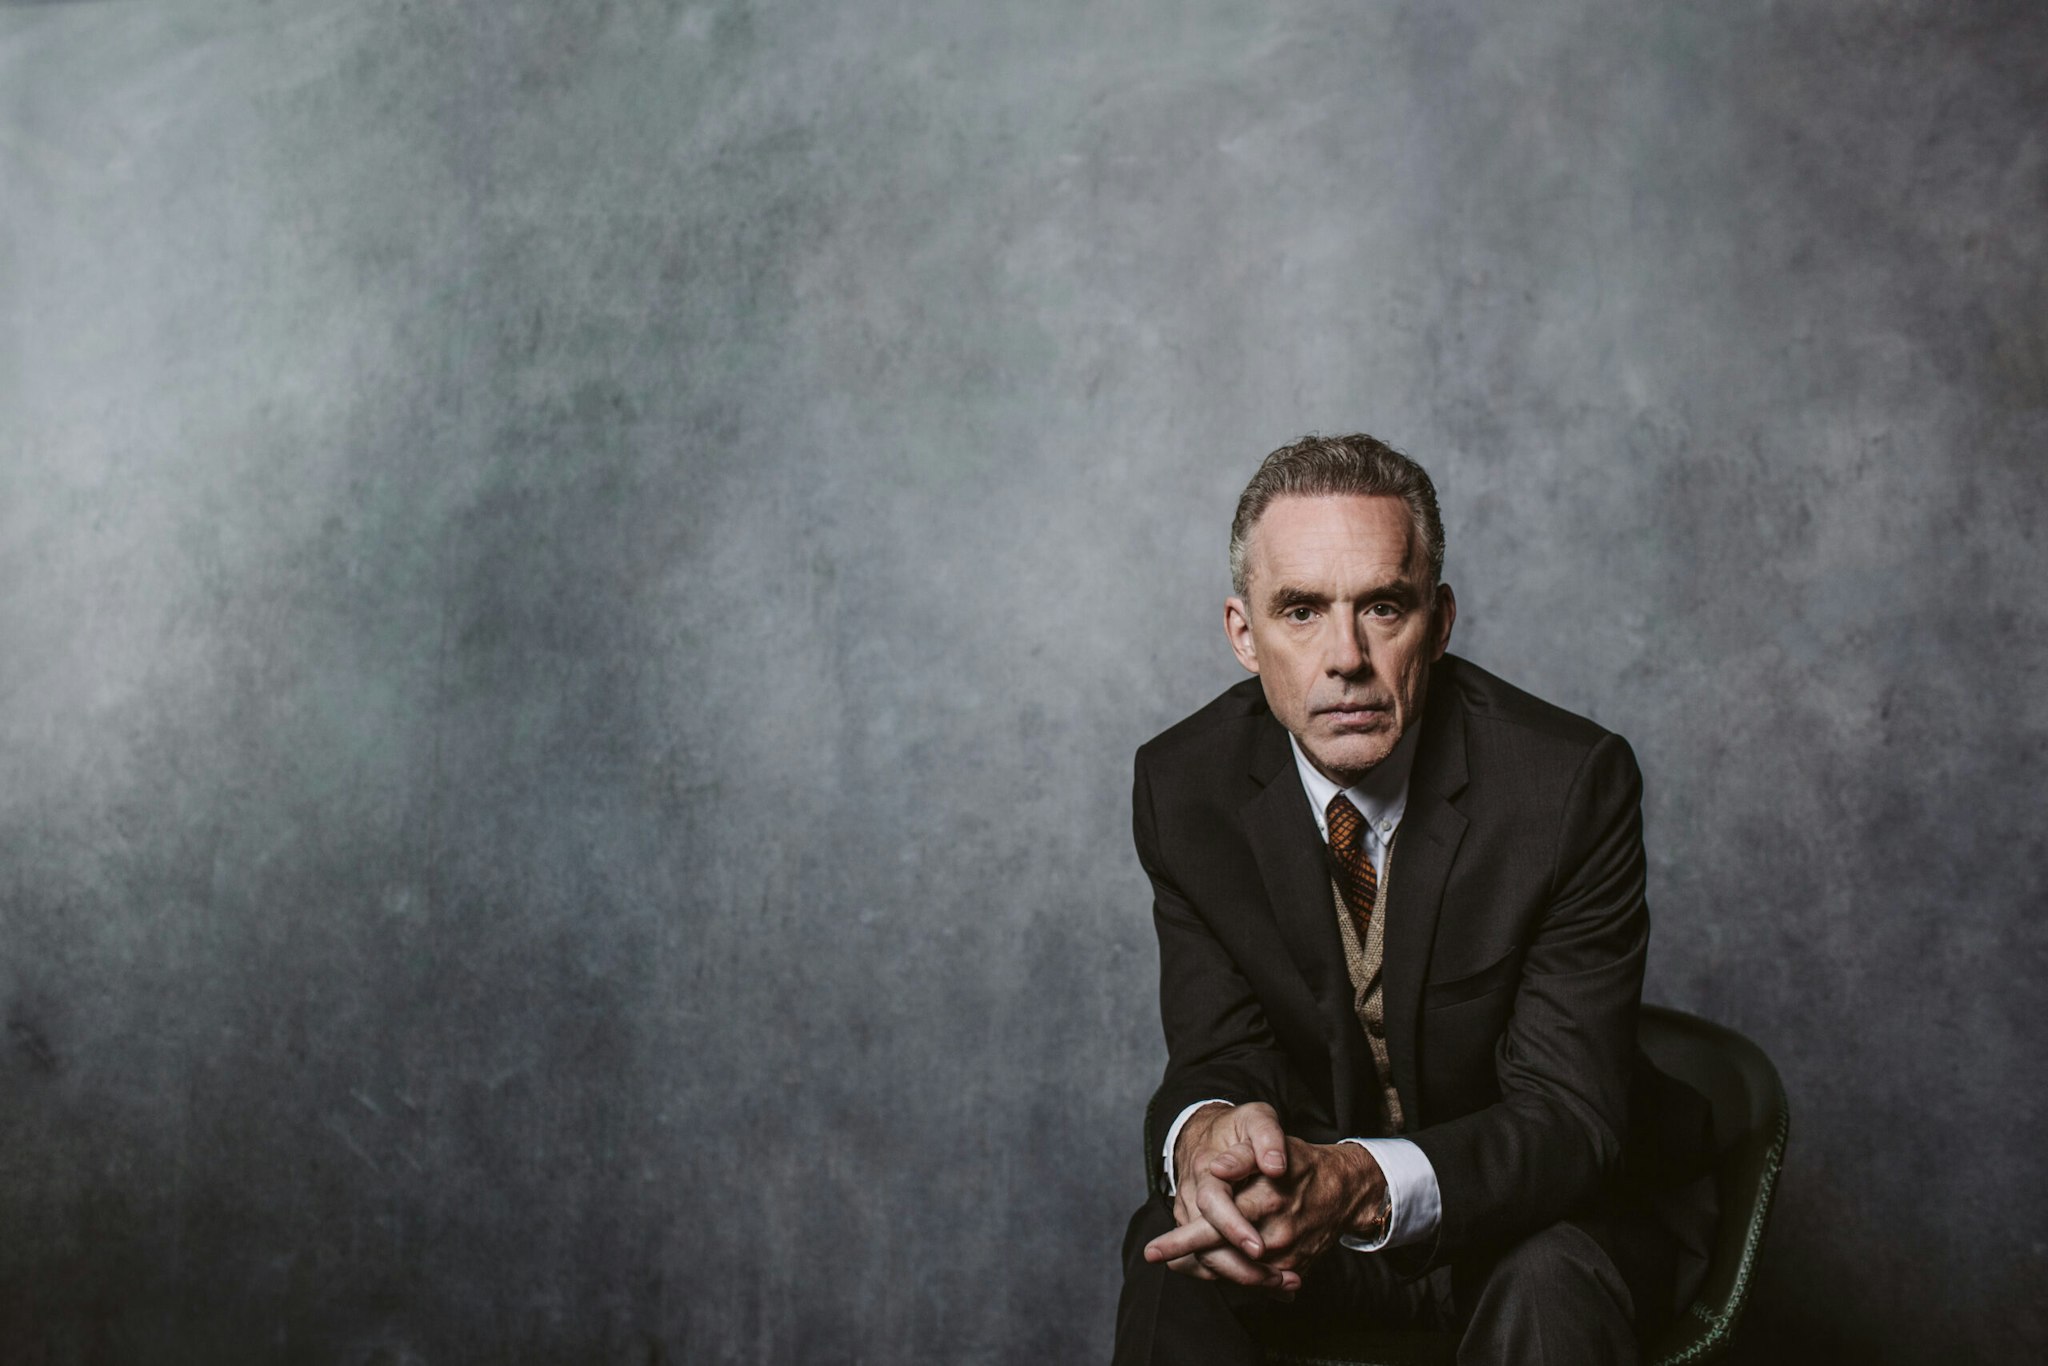 Jordan Peterson has joined DailyWire+, the company announced Wednesday, June 29, 2022.